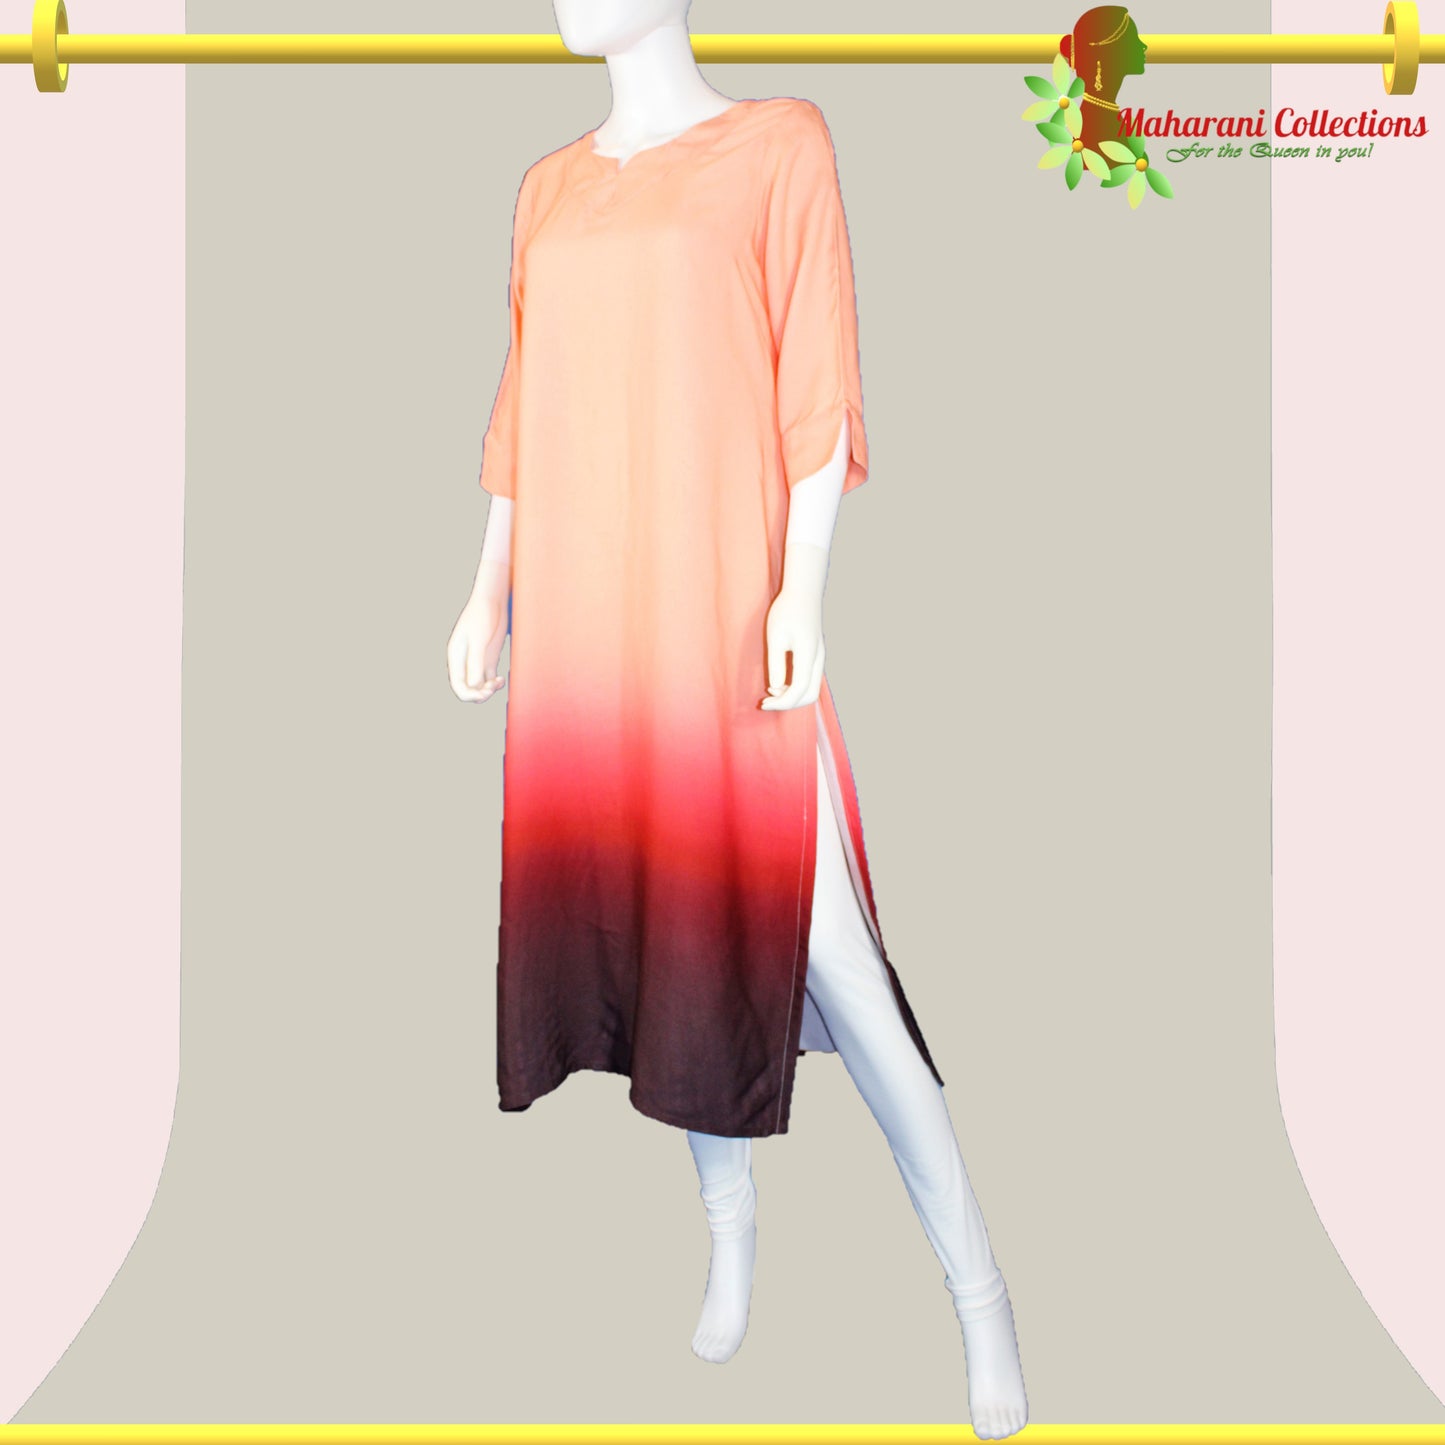 Maharani's Soft Cotton Long Dress - Pink, Red and Brown (M)